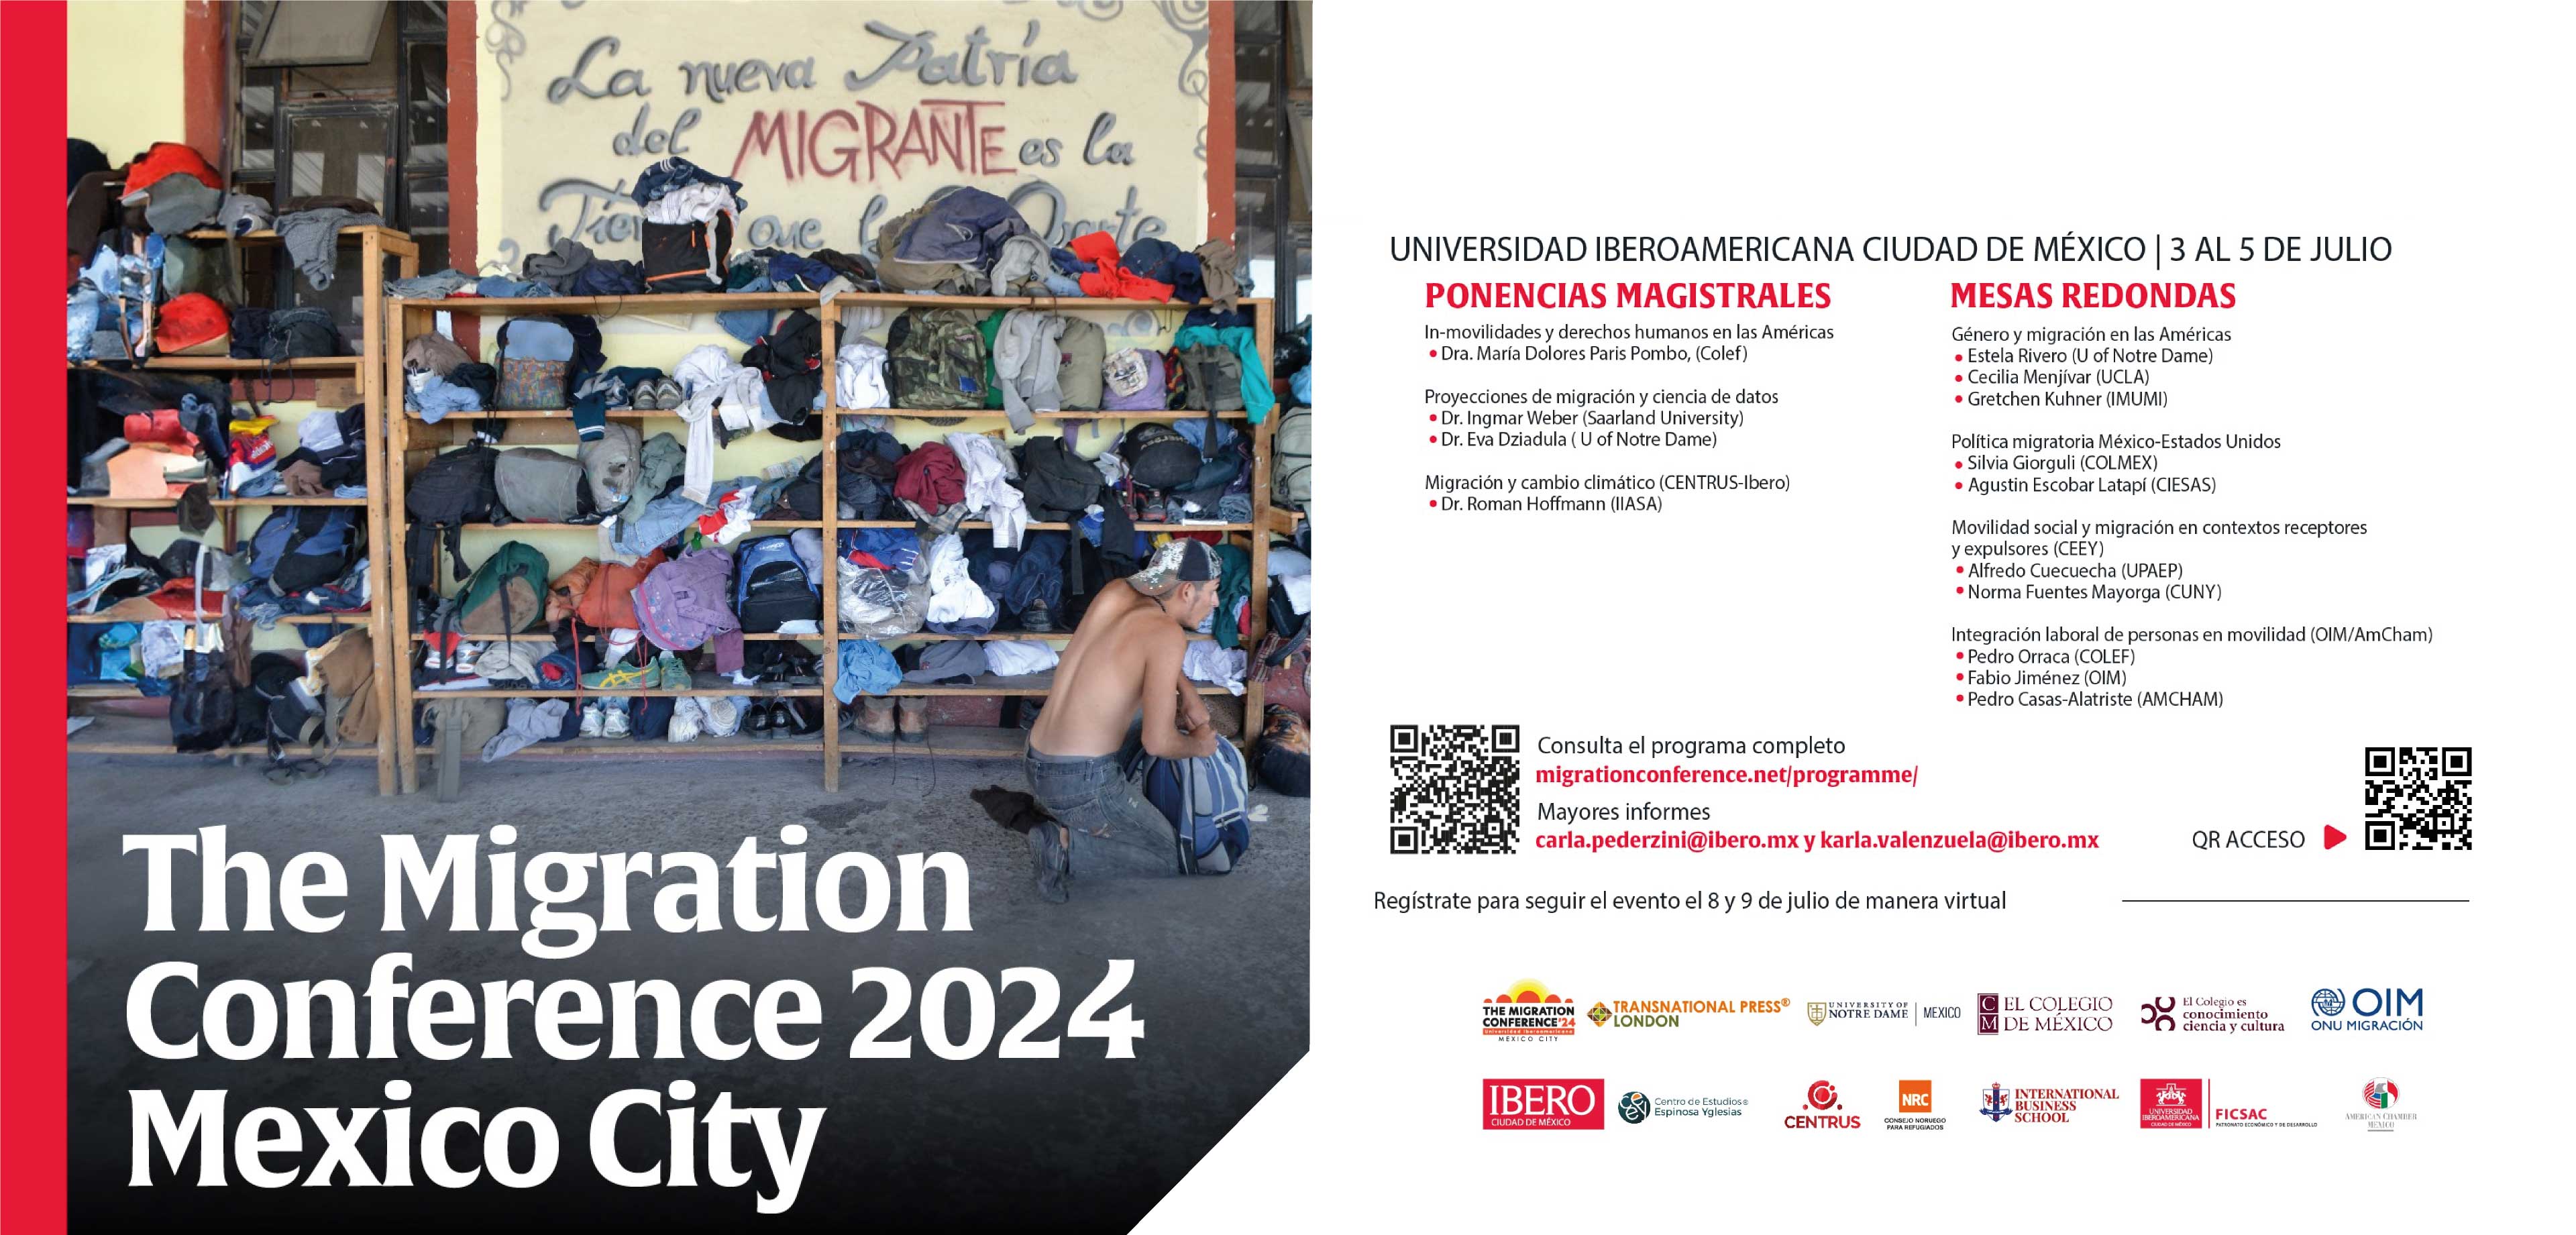 The Migration Conference 2024